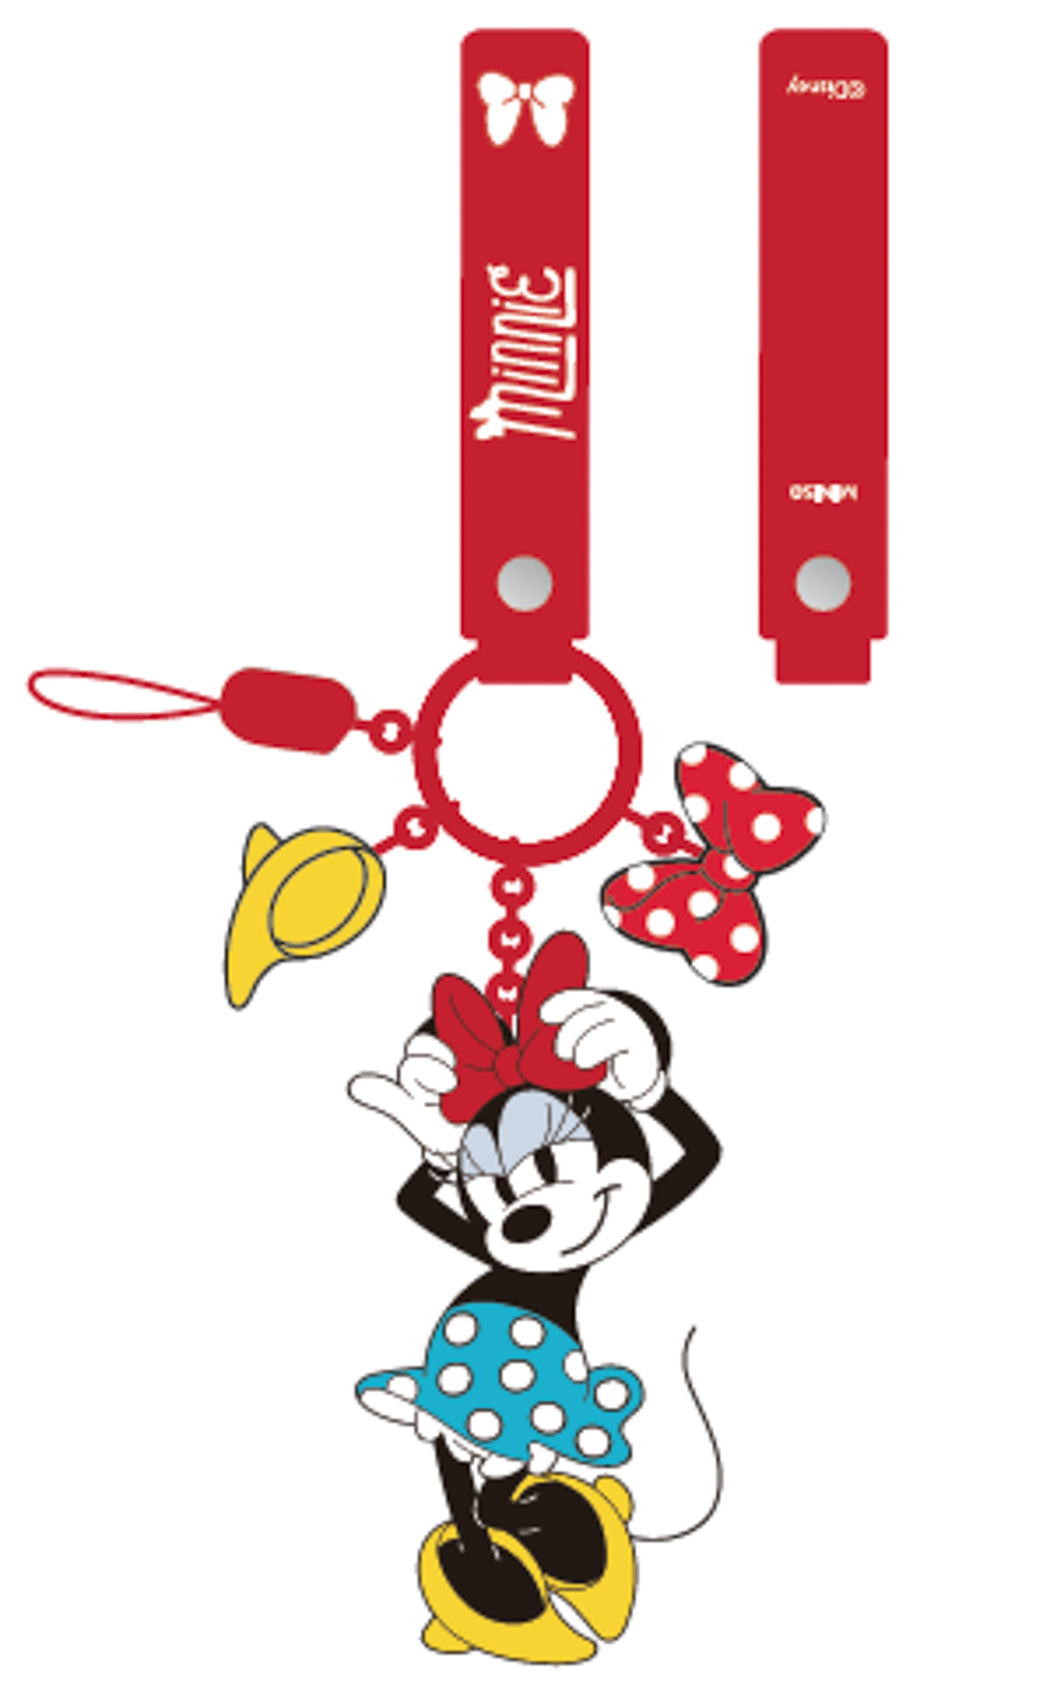 MINISO MICKEY MOUSE COLLECTION PHONE CHARM STRAP(MINNIE) 2012193911108 PHONE STRAP-1